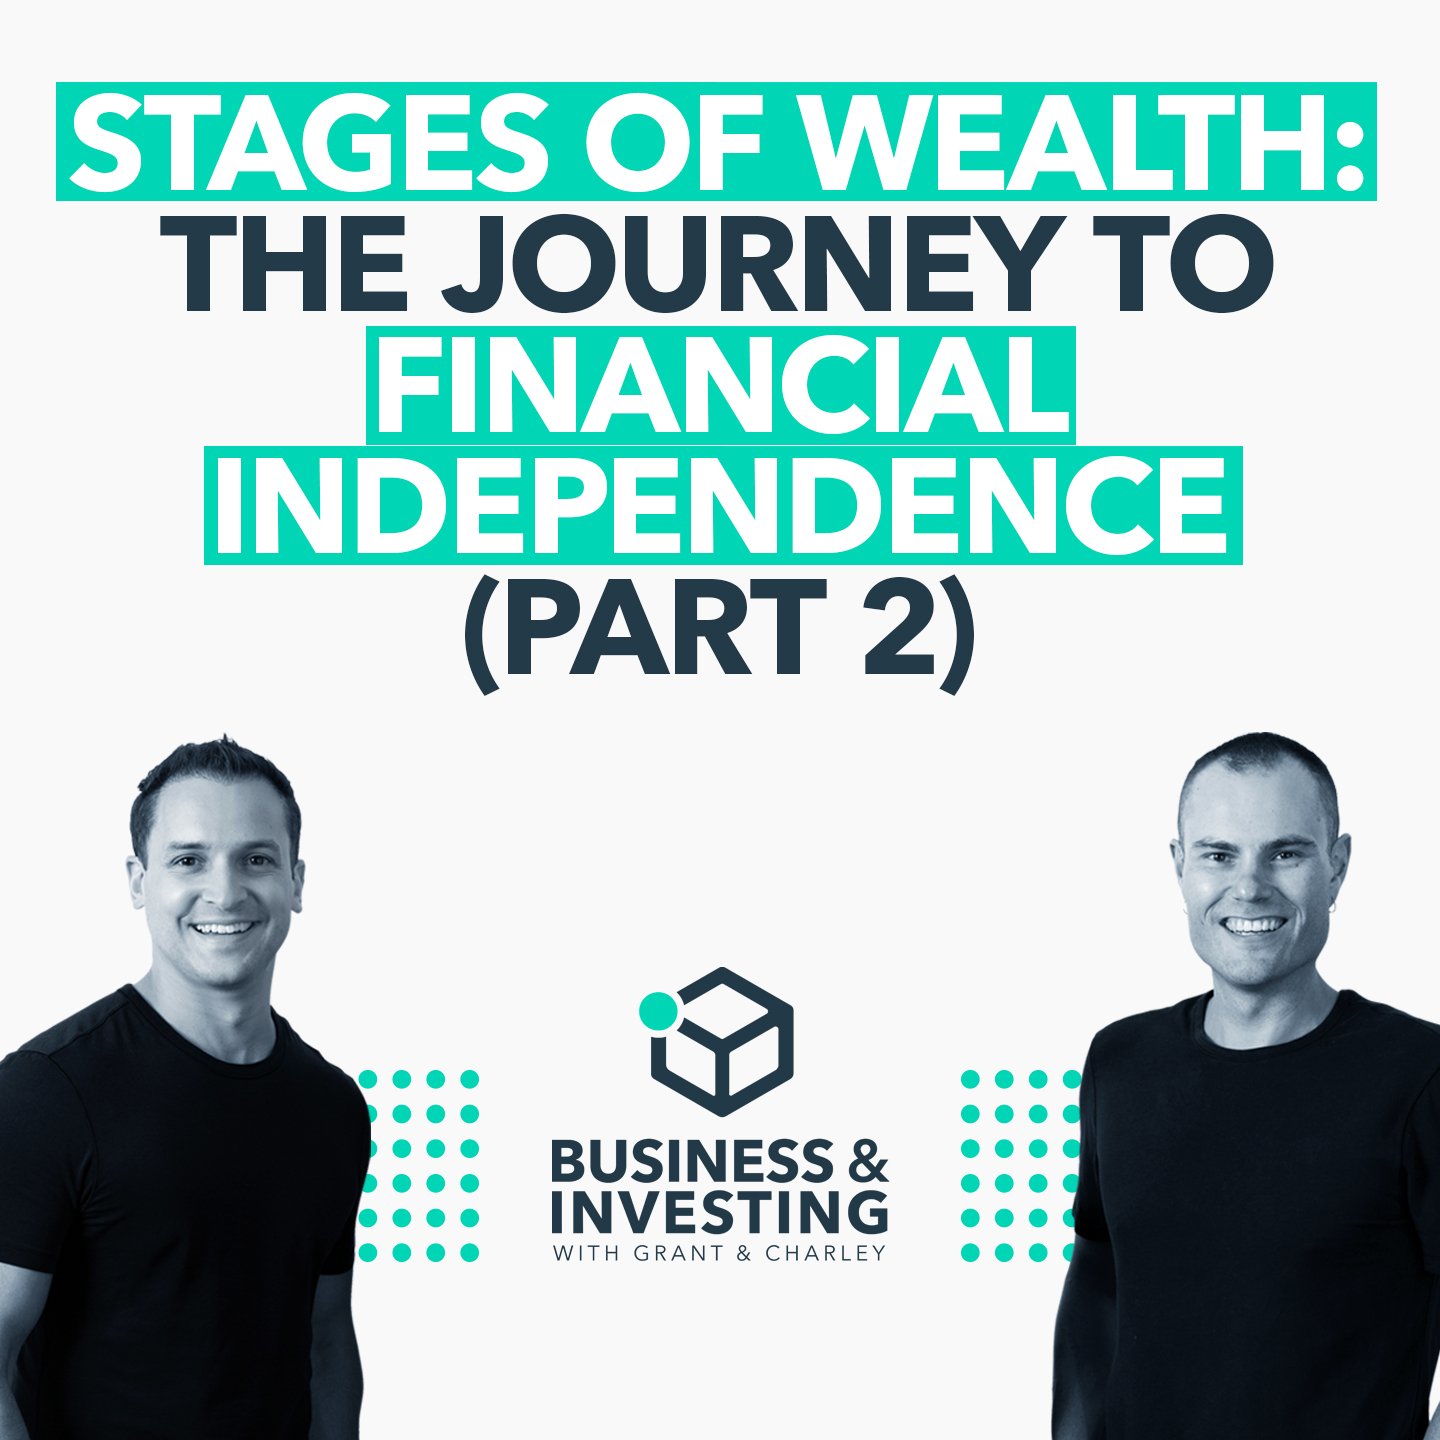 Stages of Wealth: The Journey to Financial Independence (Part 2)